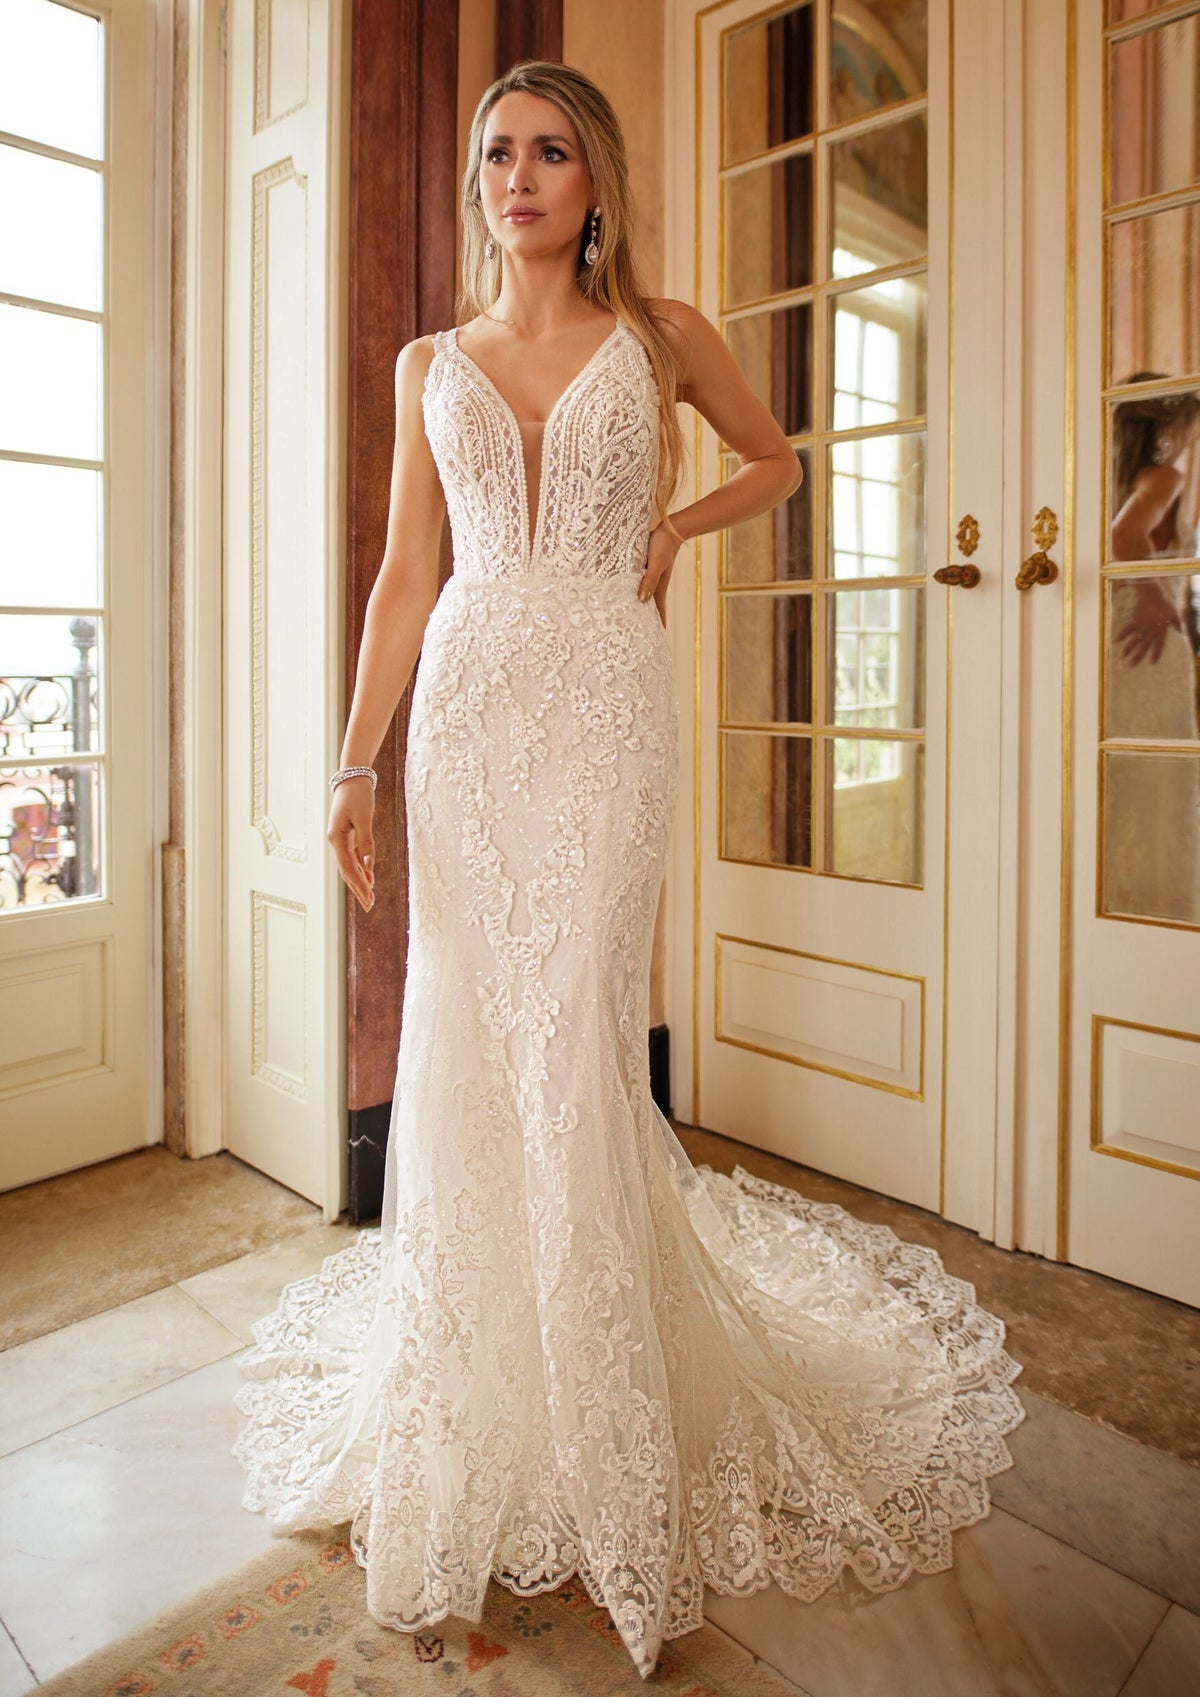 Elegant and Luxurious Sleeveless Fit and Flare Open Back Wedding Dress Bridal Gown All Over Lace Scallop Edge V Neck Straps Fitted